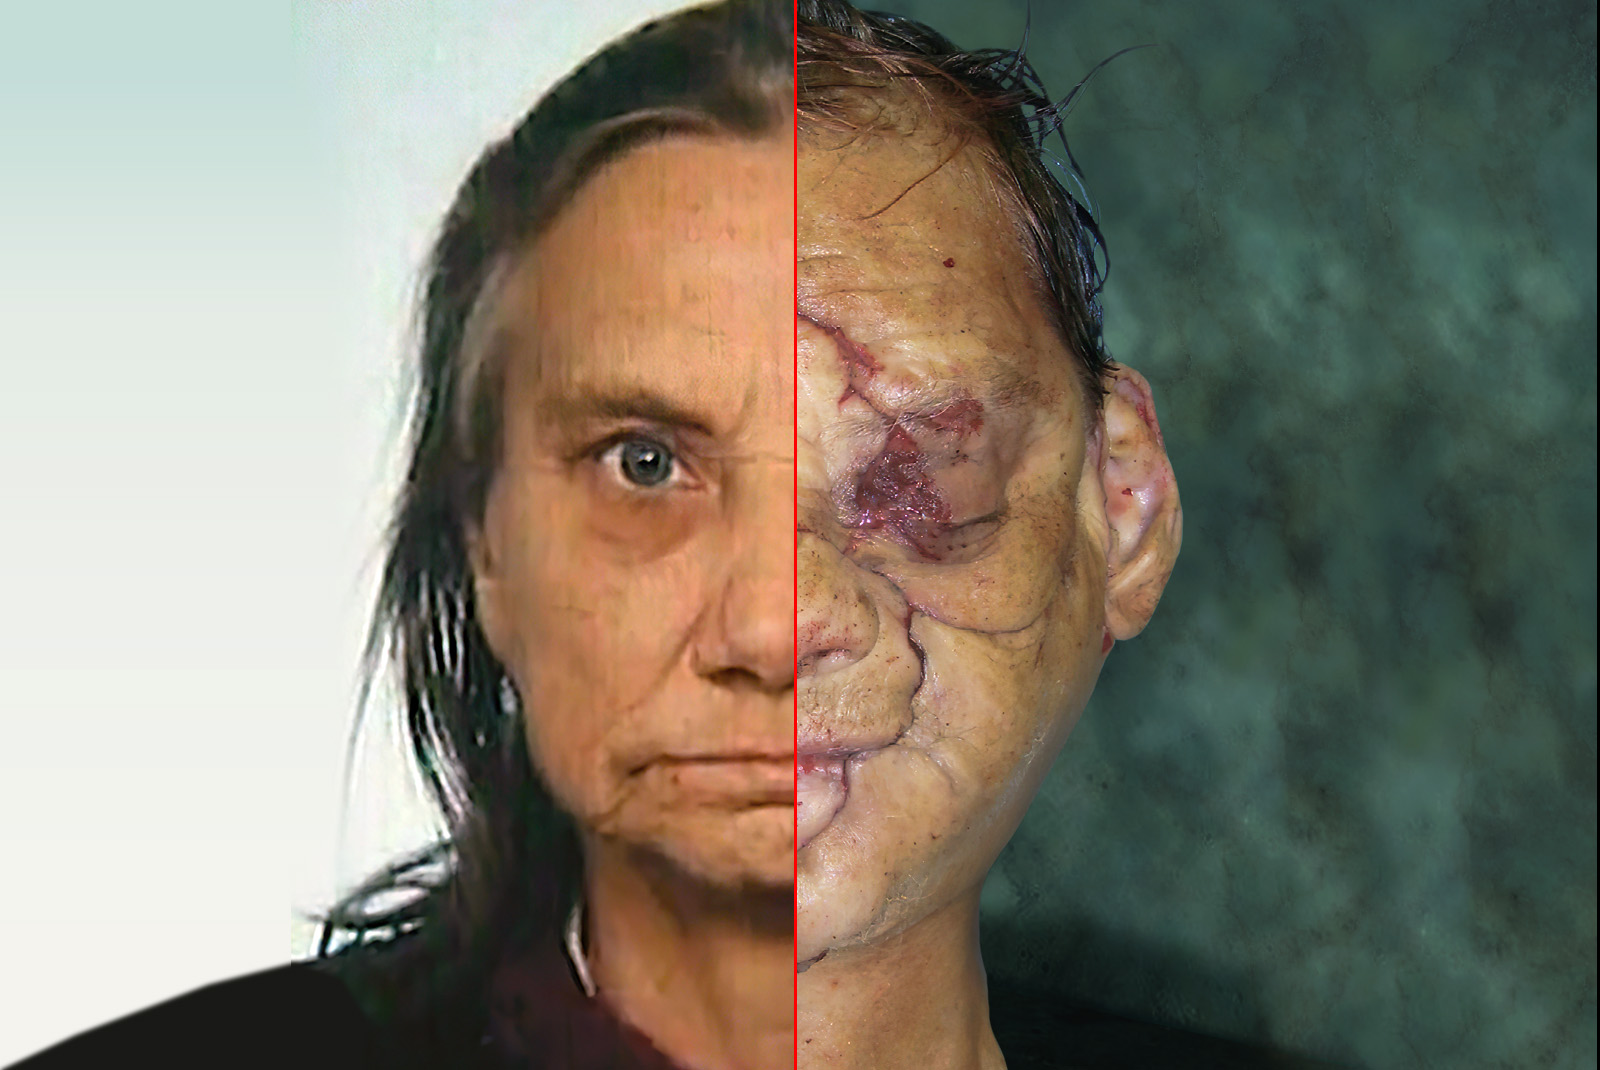 A facial reconstruction and identification technique for seriously devastating head wounds